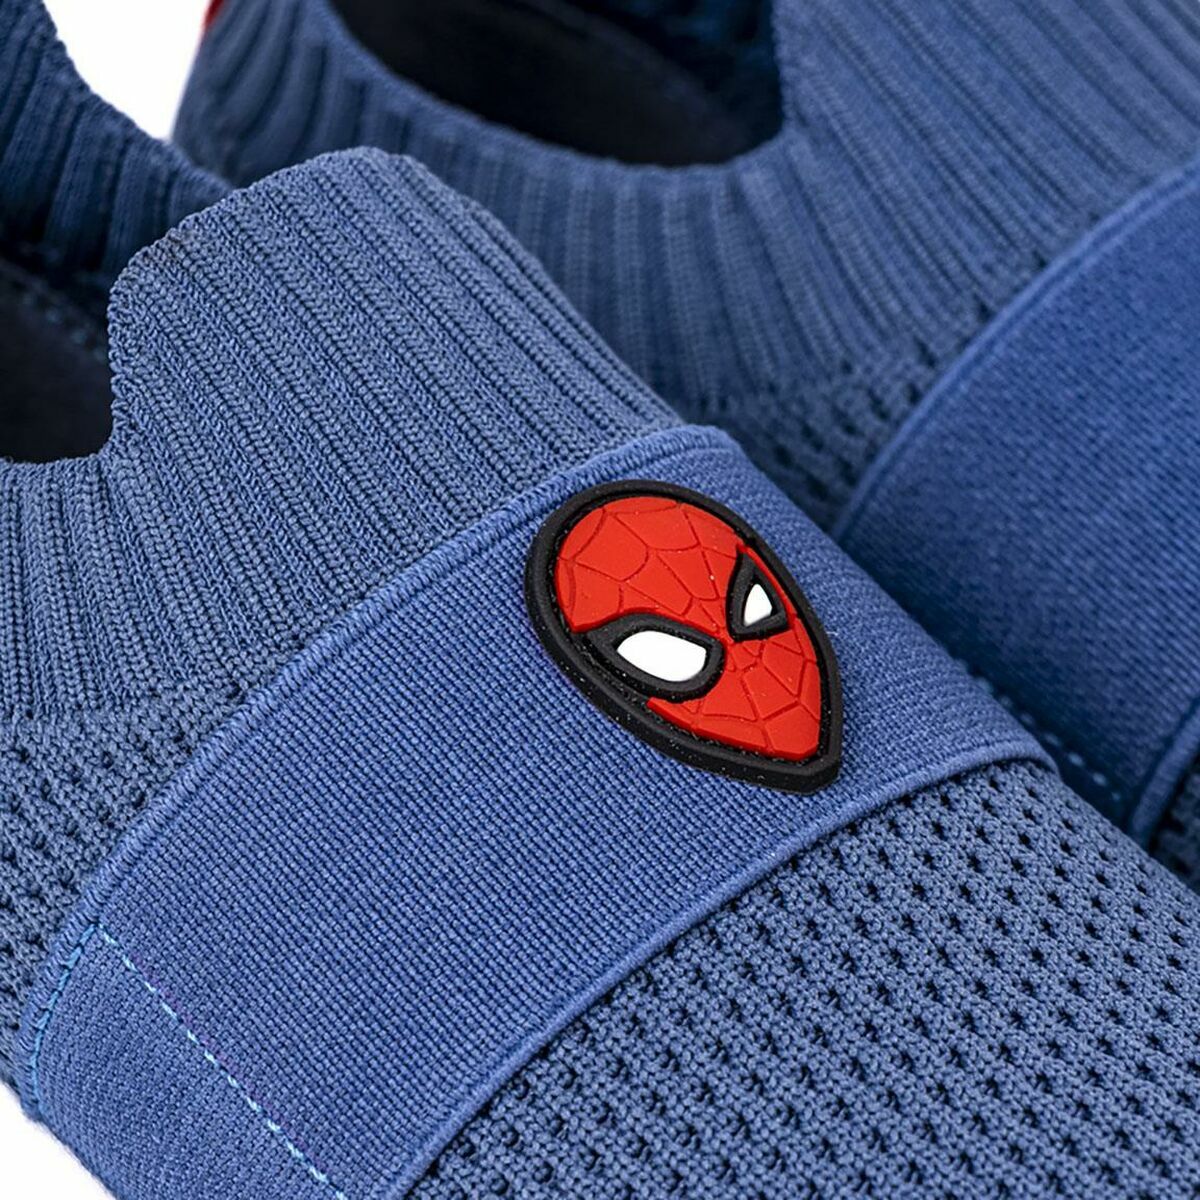 Sports Shoes for Kids Spiderman Blue